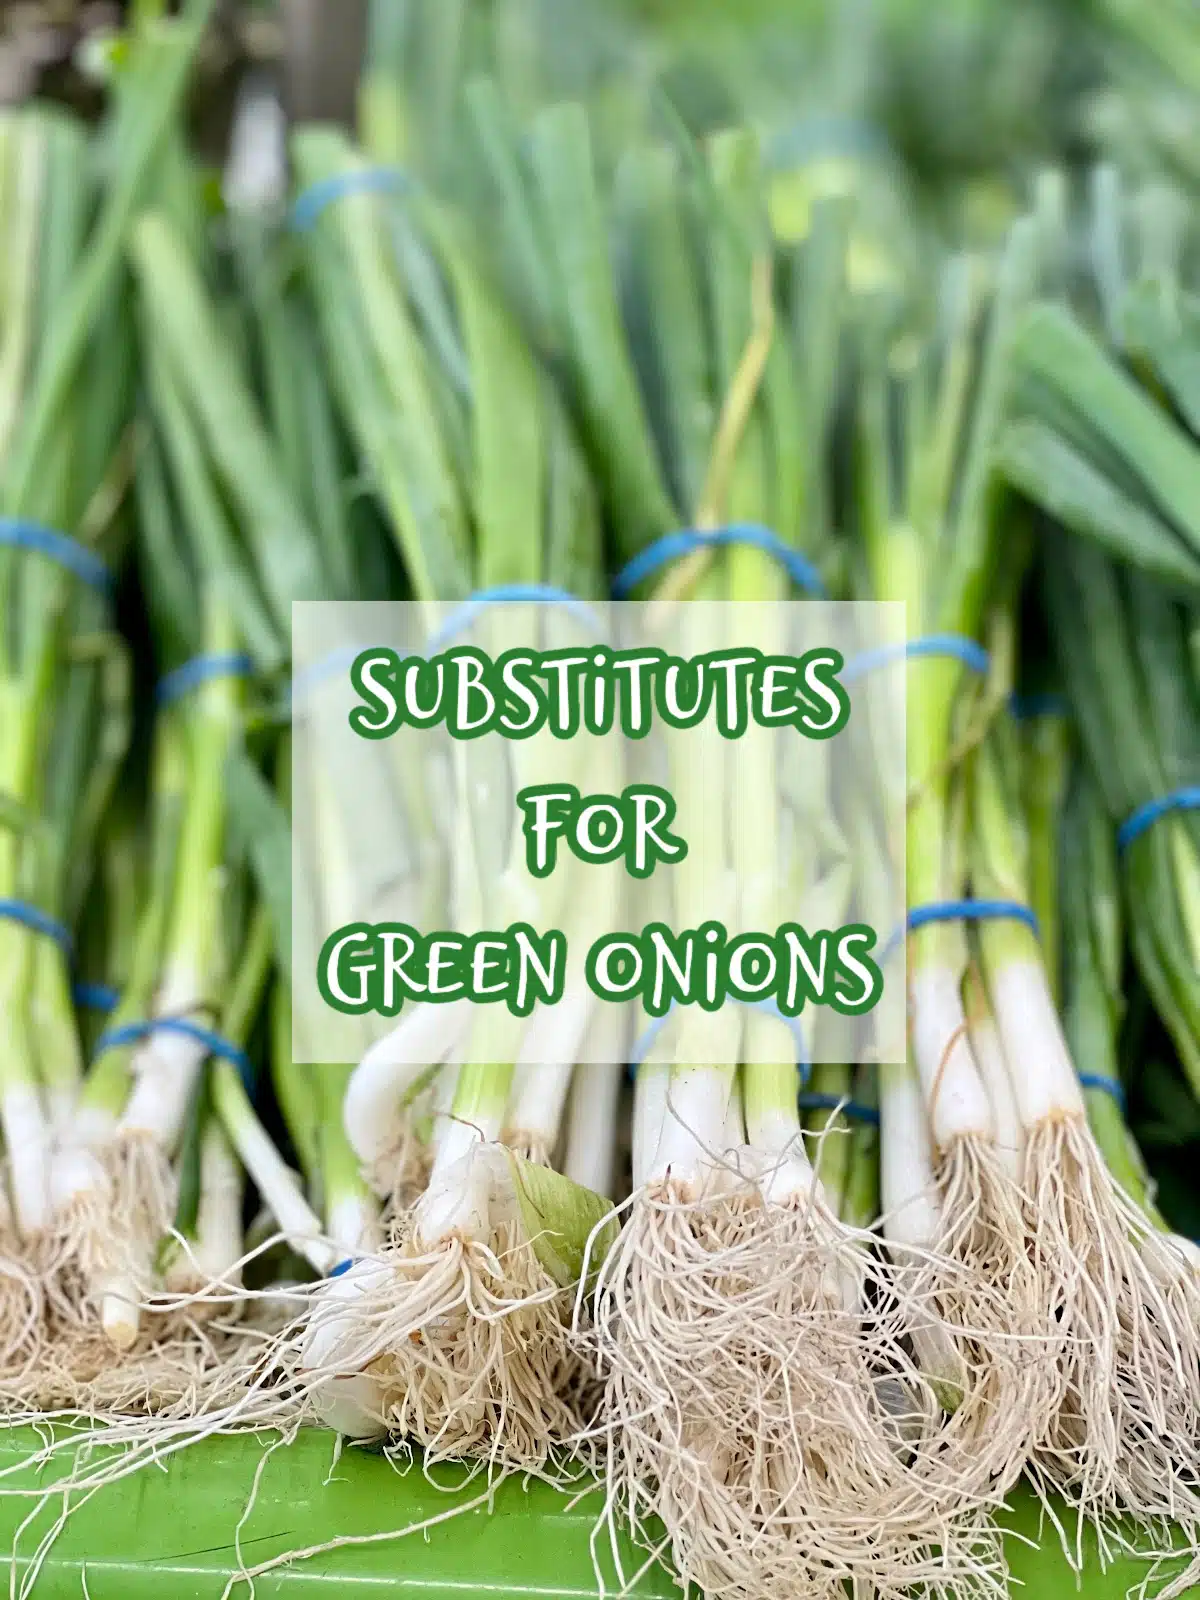 bunches of green onions with text overlay